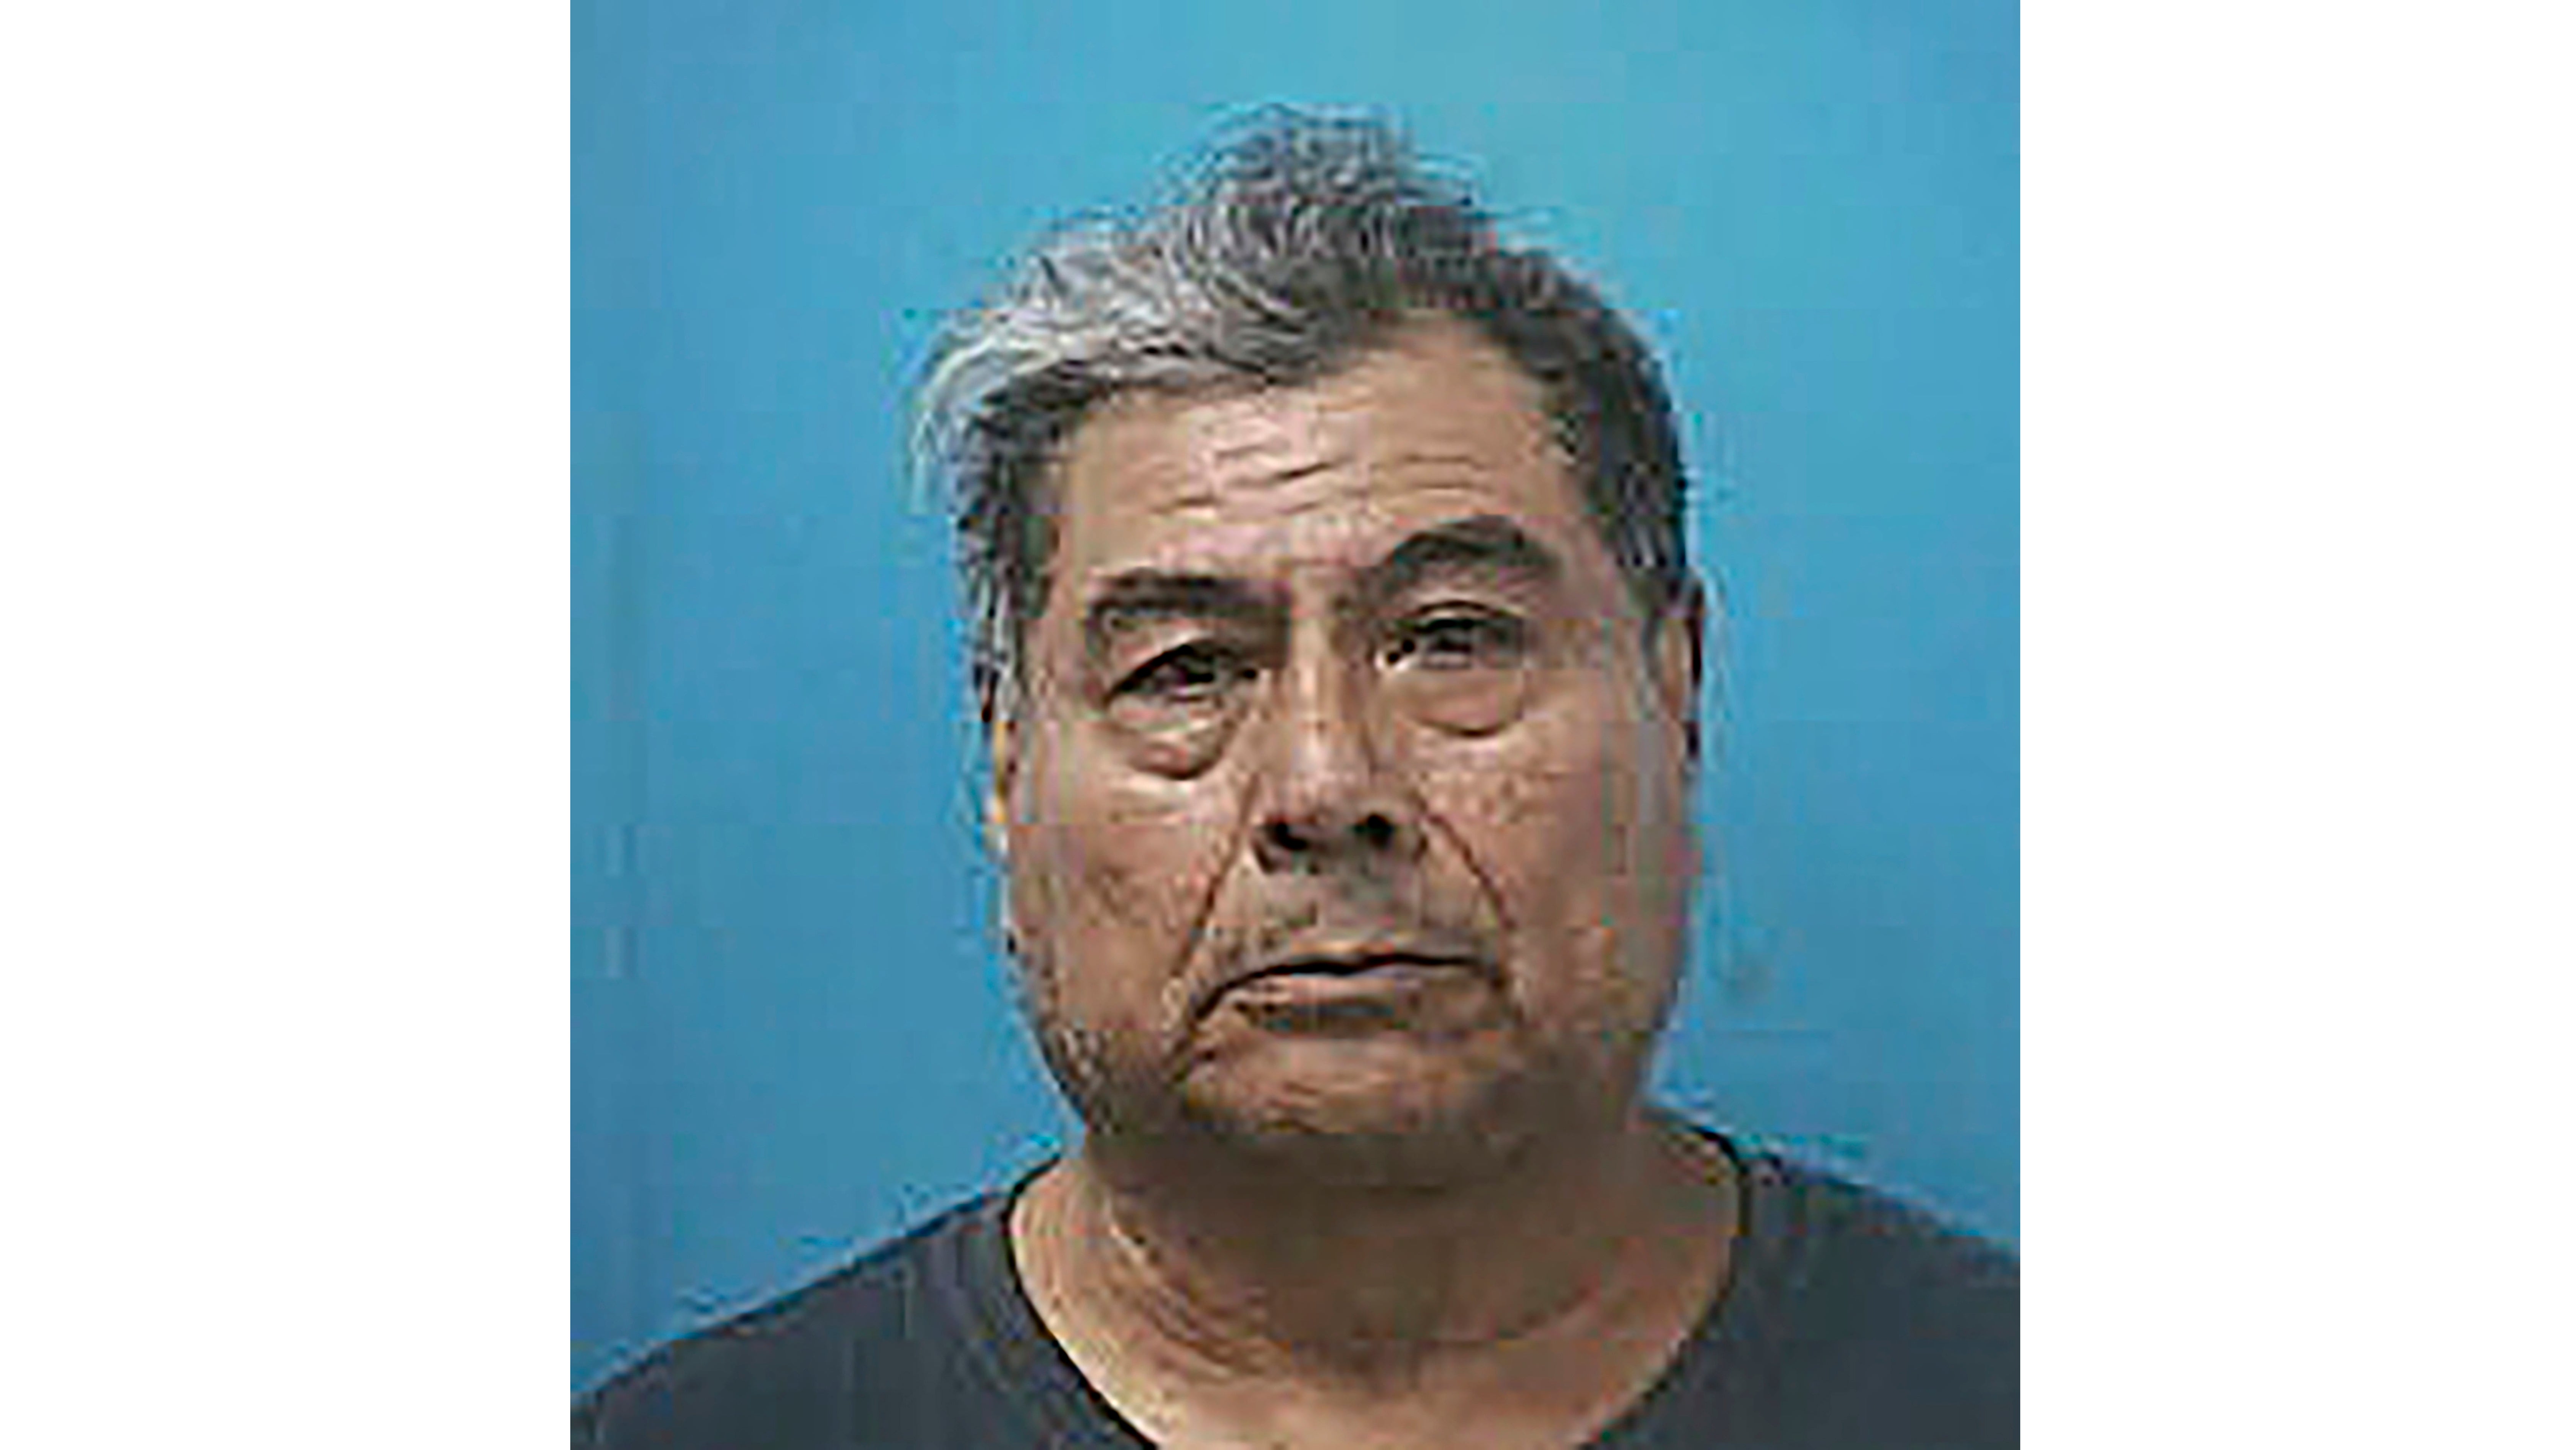 This image provided by the Franklin Police Department shows Camilo Hurtado Campos. The Tennessee soccer coach is accused of drugging and raping at least 10 boys between the ages of 9 and 17 after photos and videos of the children were discovered on his cell phone.